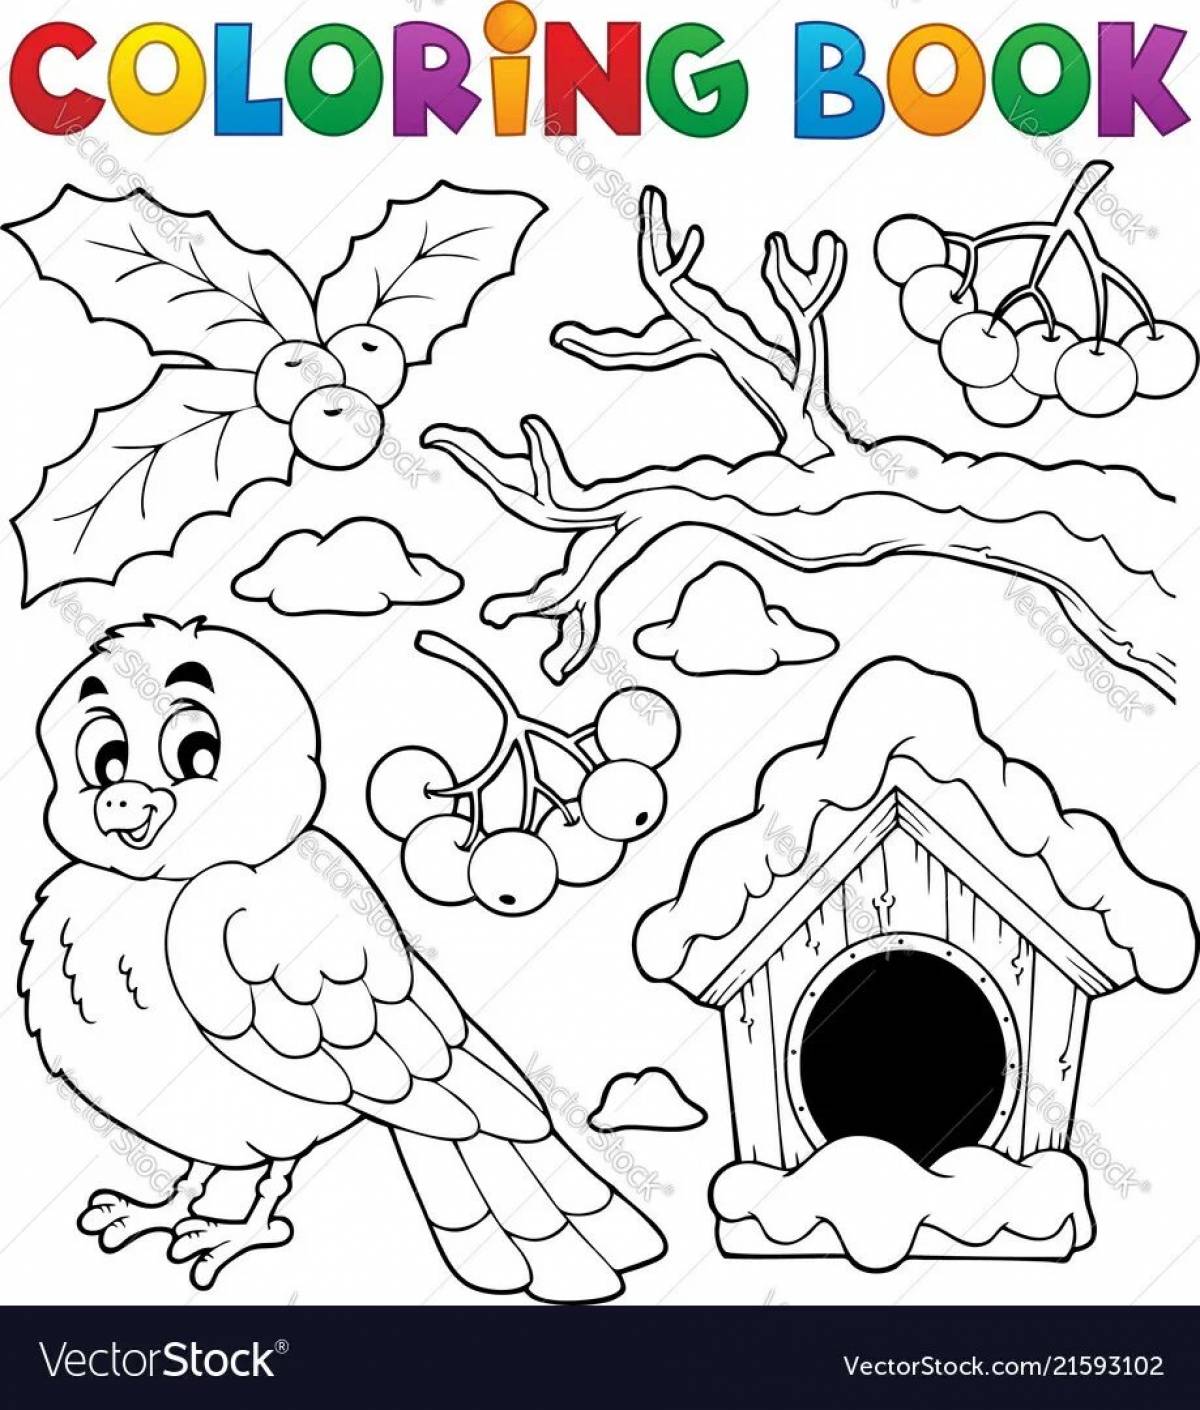 Feed the birds shiny coloring page